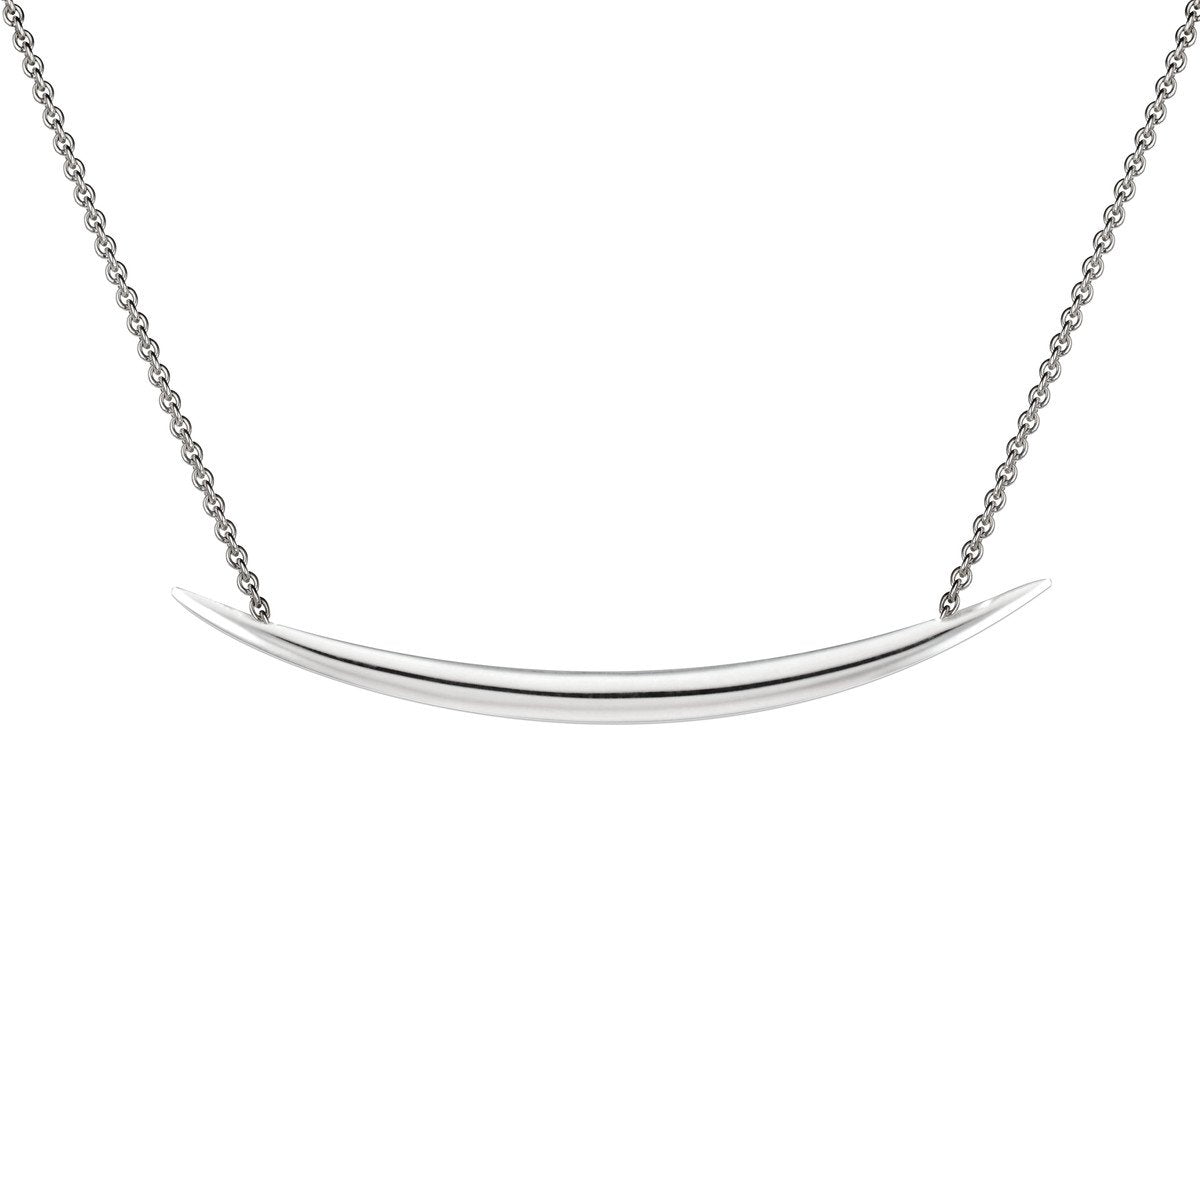 Shaun Leane Quill Sterling Silver Necklace 